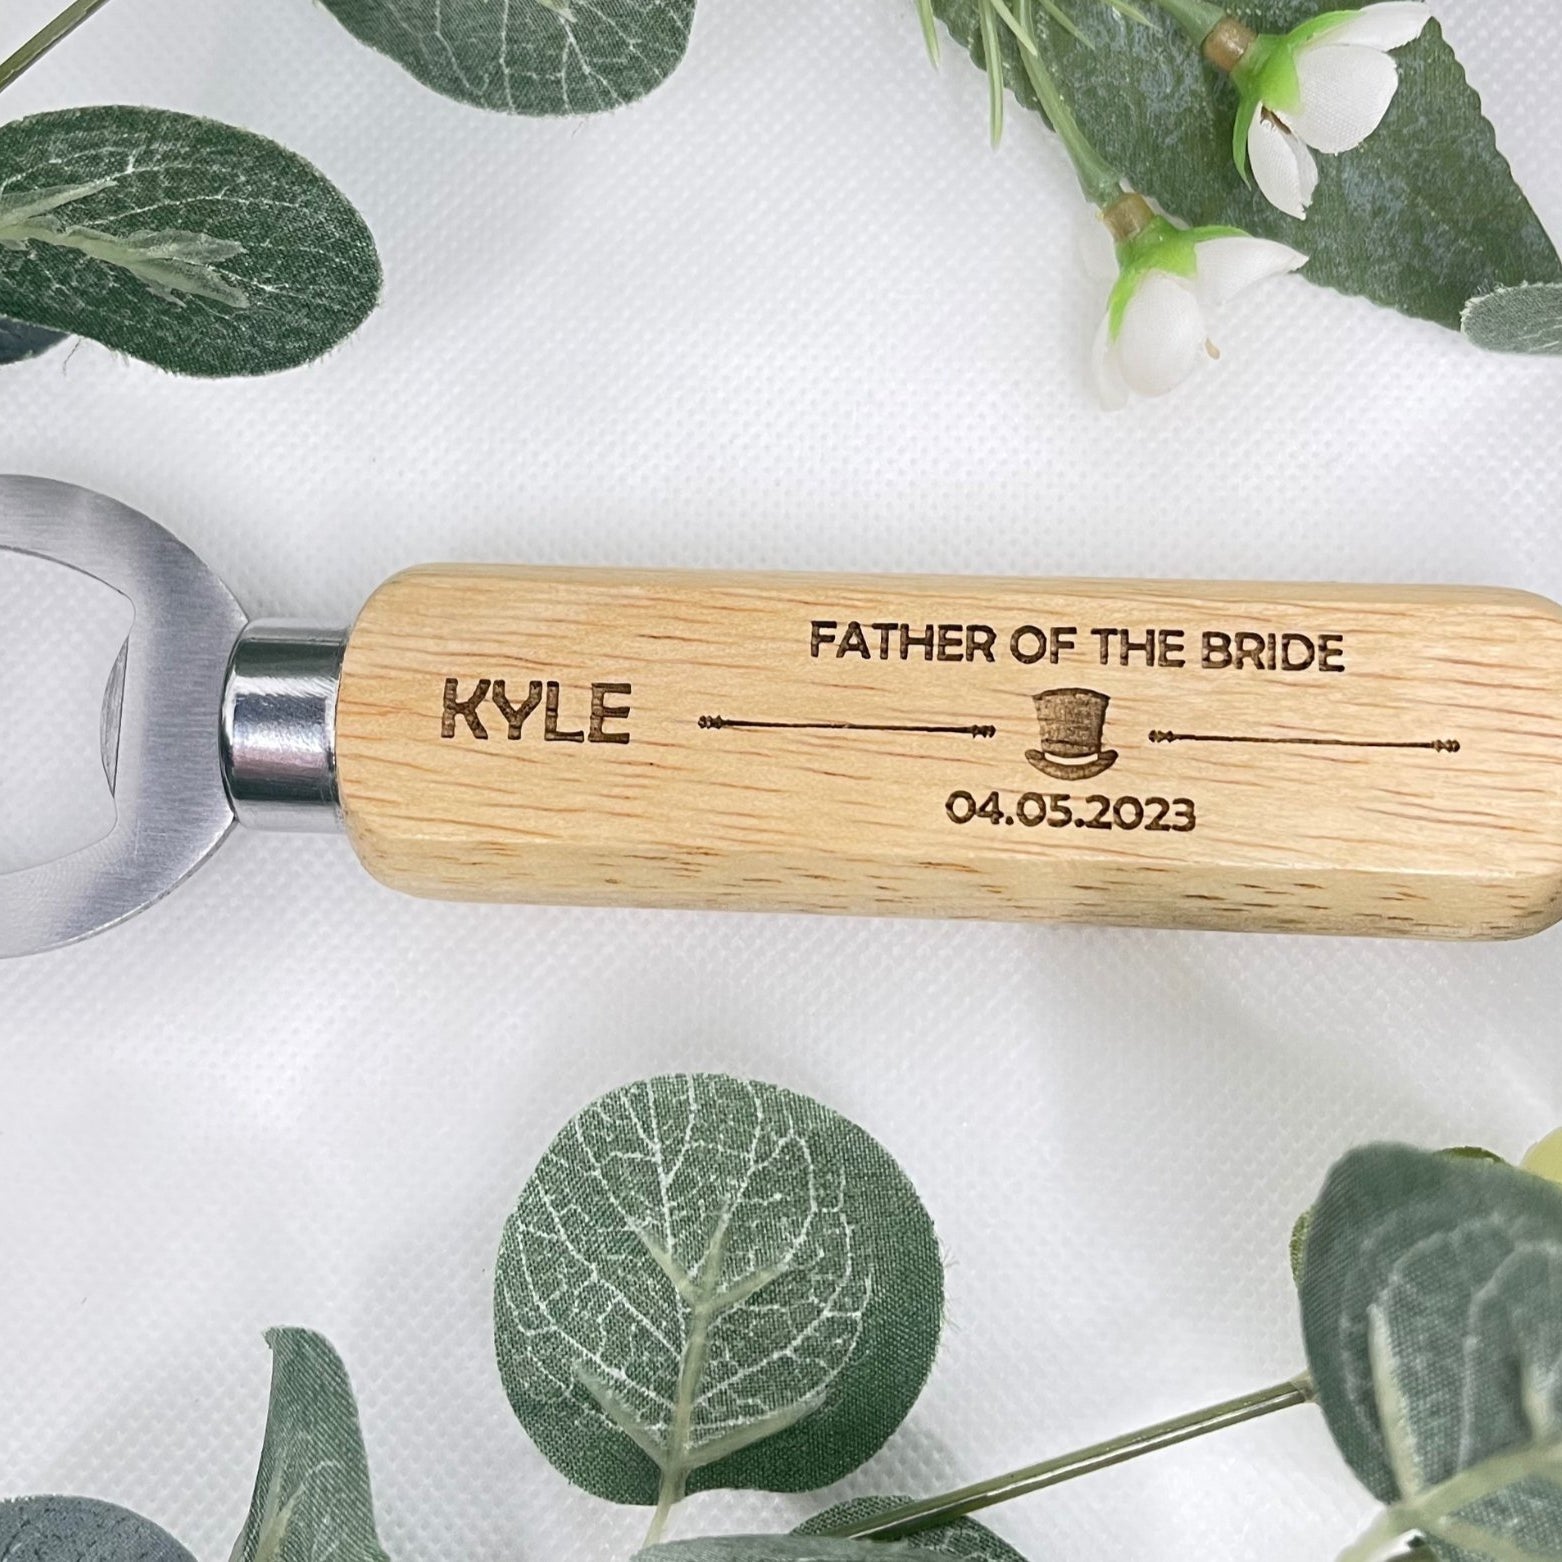 Celebrate your special day with our charming Personalised Wedding Bottle Openers. Handcrafted and laser-engraved with a whimsical hat image, these keepsakes make the perfect wedding or Stag Do gift. With durable stainless steel and natural wood design, each opener is personalised with the recipient's name, role, and wedding date. An ideal memento that combines practicality and sentiment. Remember to hand wash only. Personalisation details needed: name, wedding role, and date.